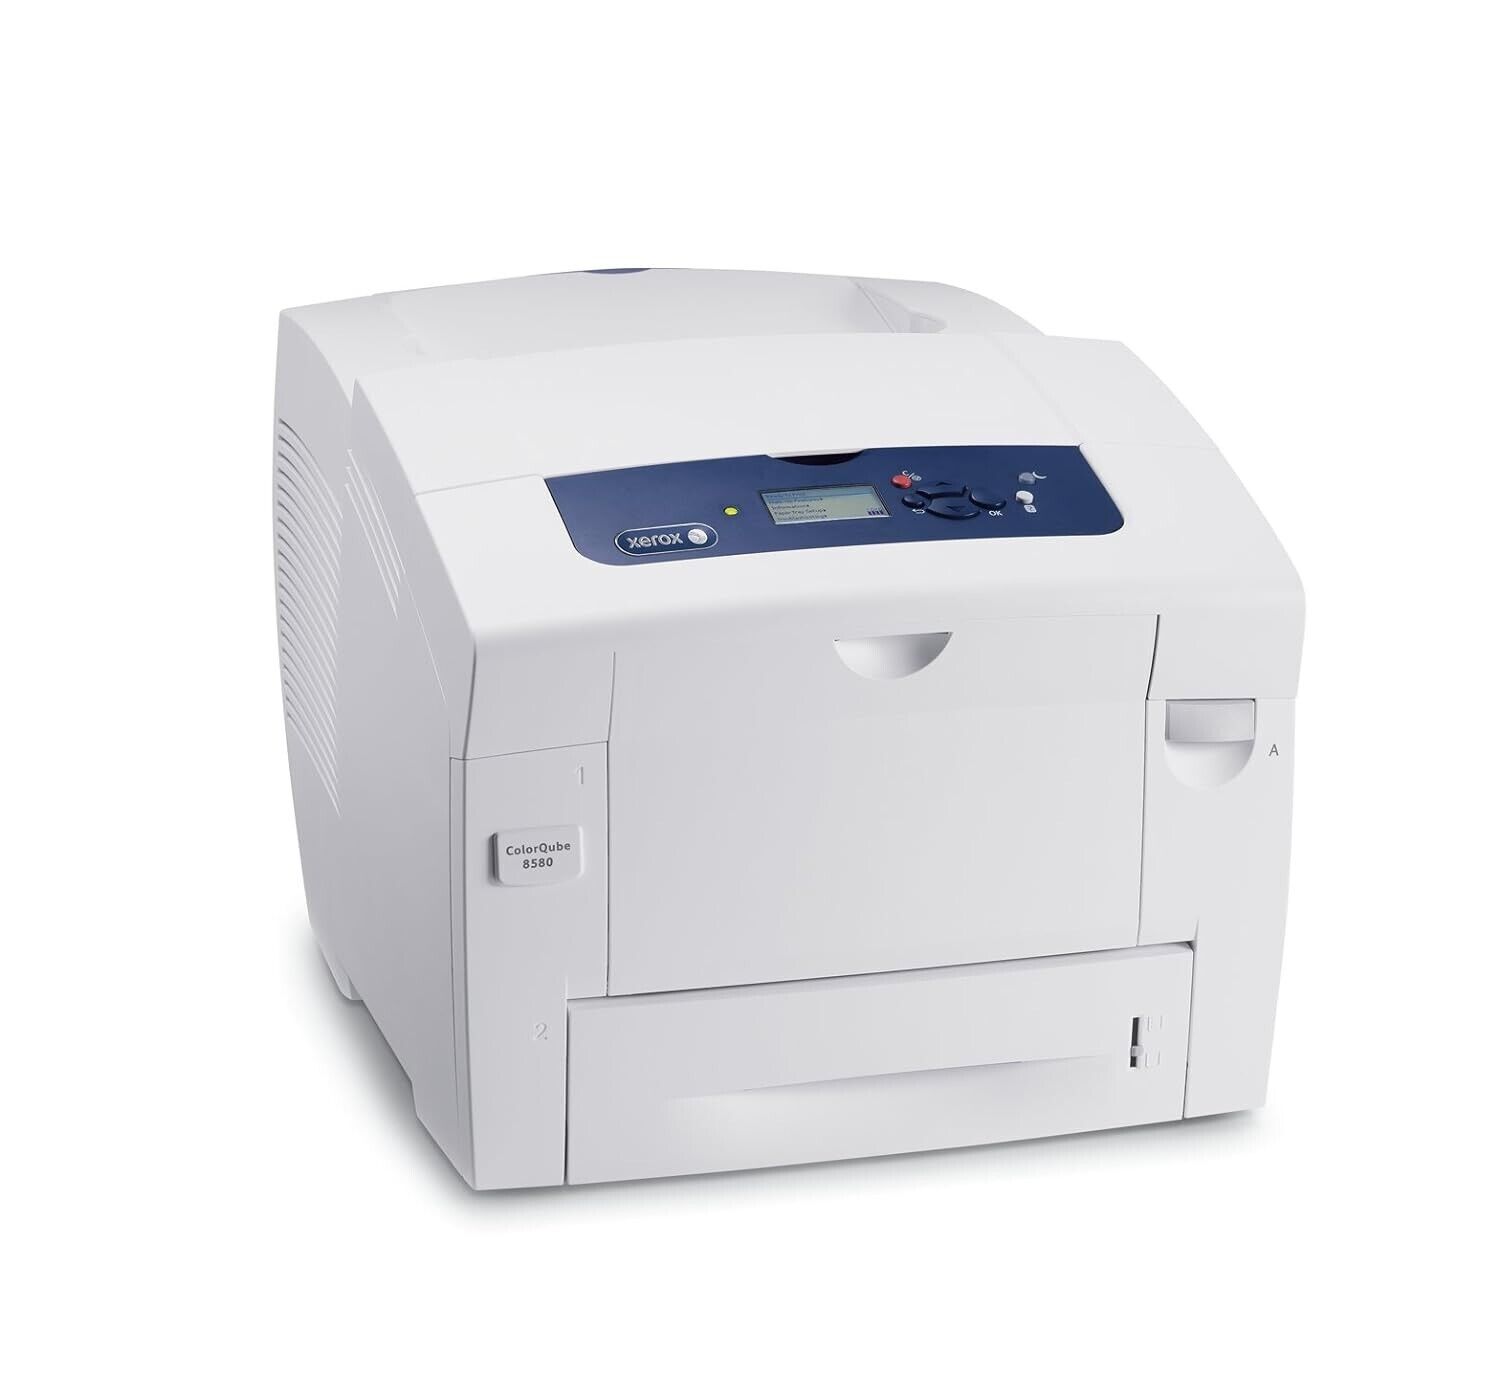 Xerox ColorQube 8580/8880 A4 Colour Network USB Solid Wax Ink Printer 51 PPM